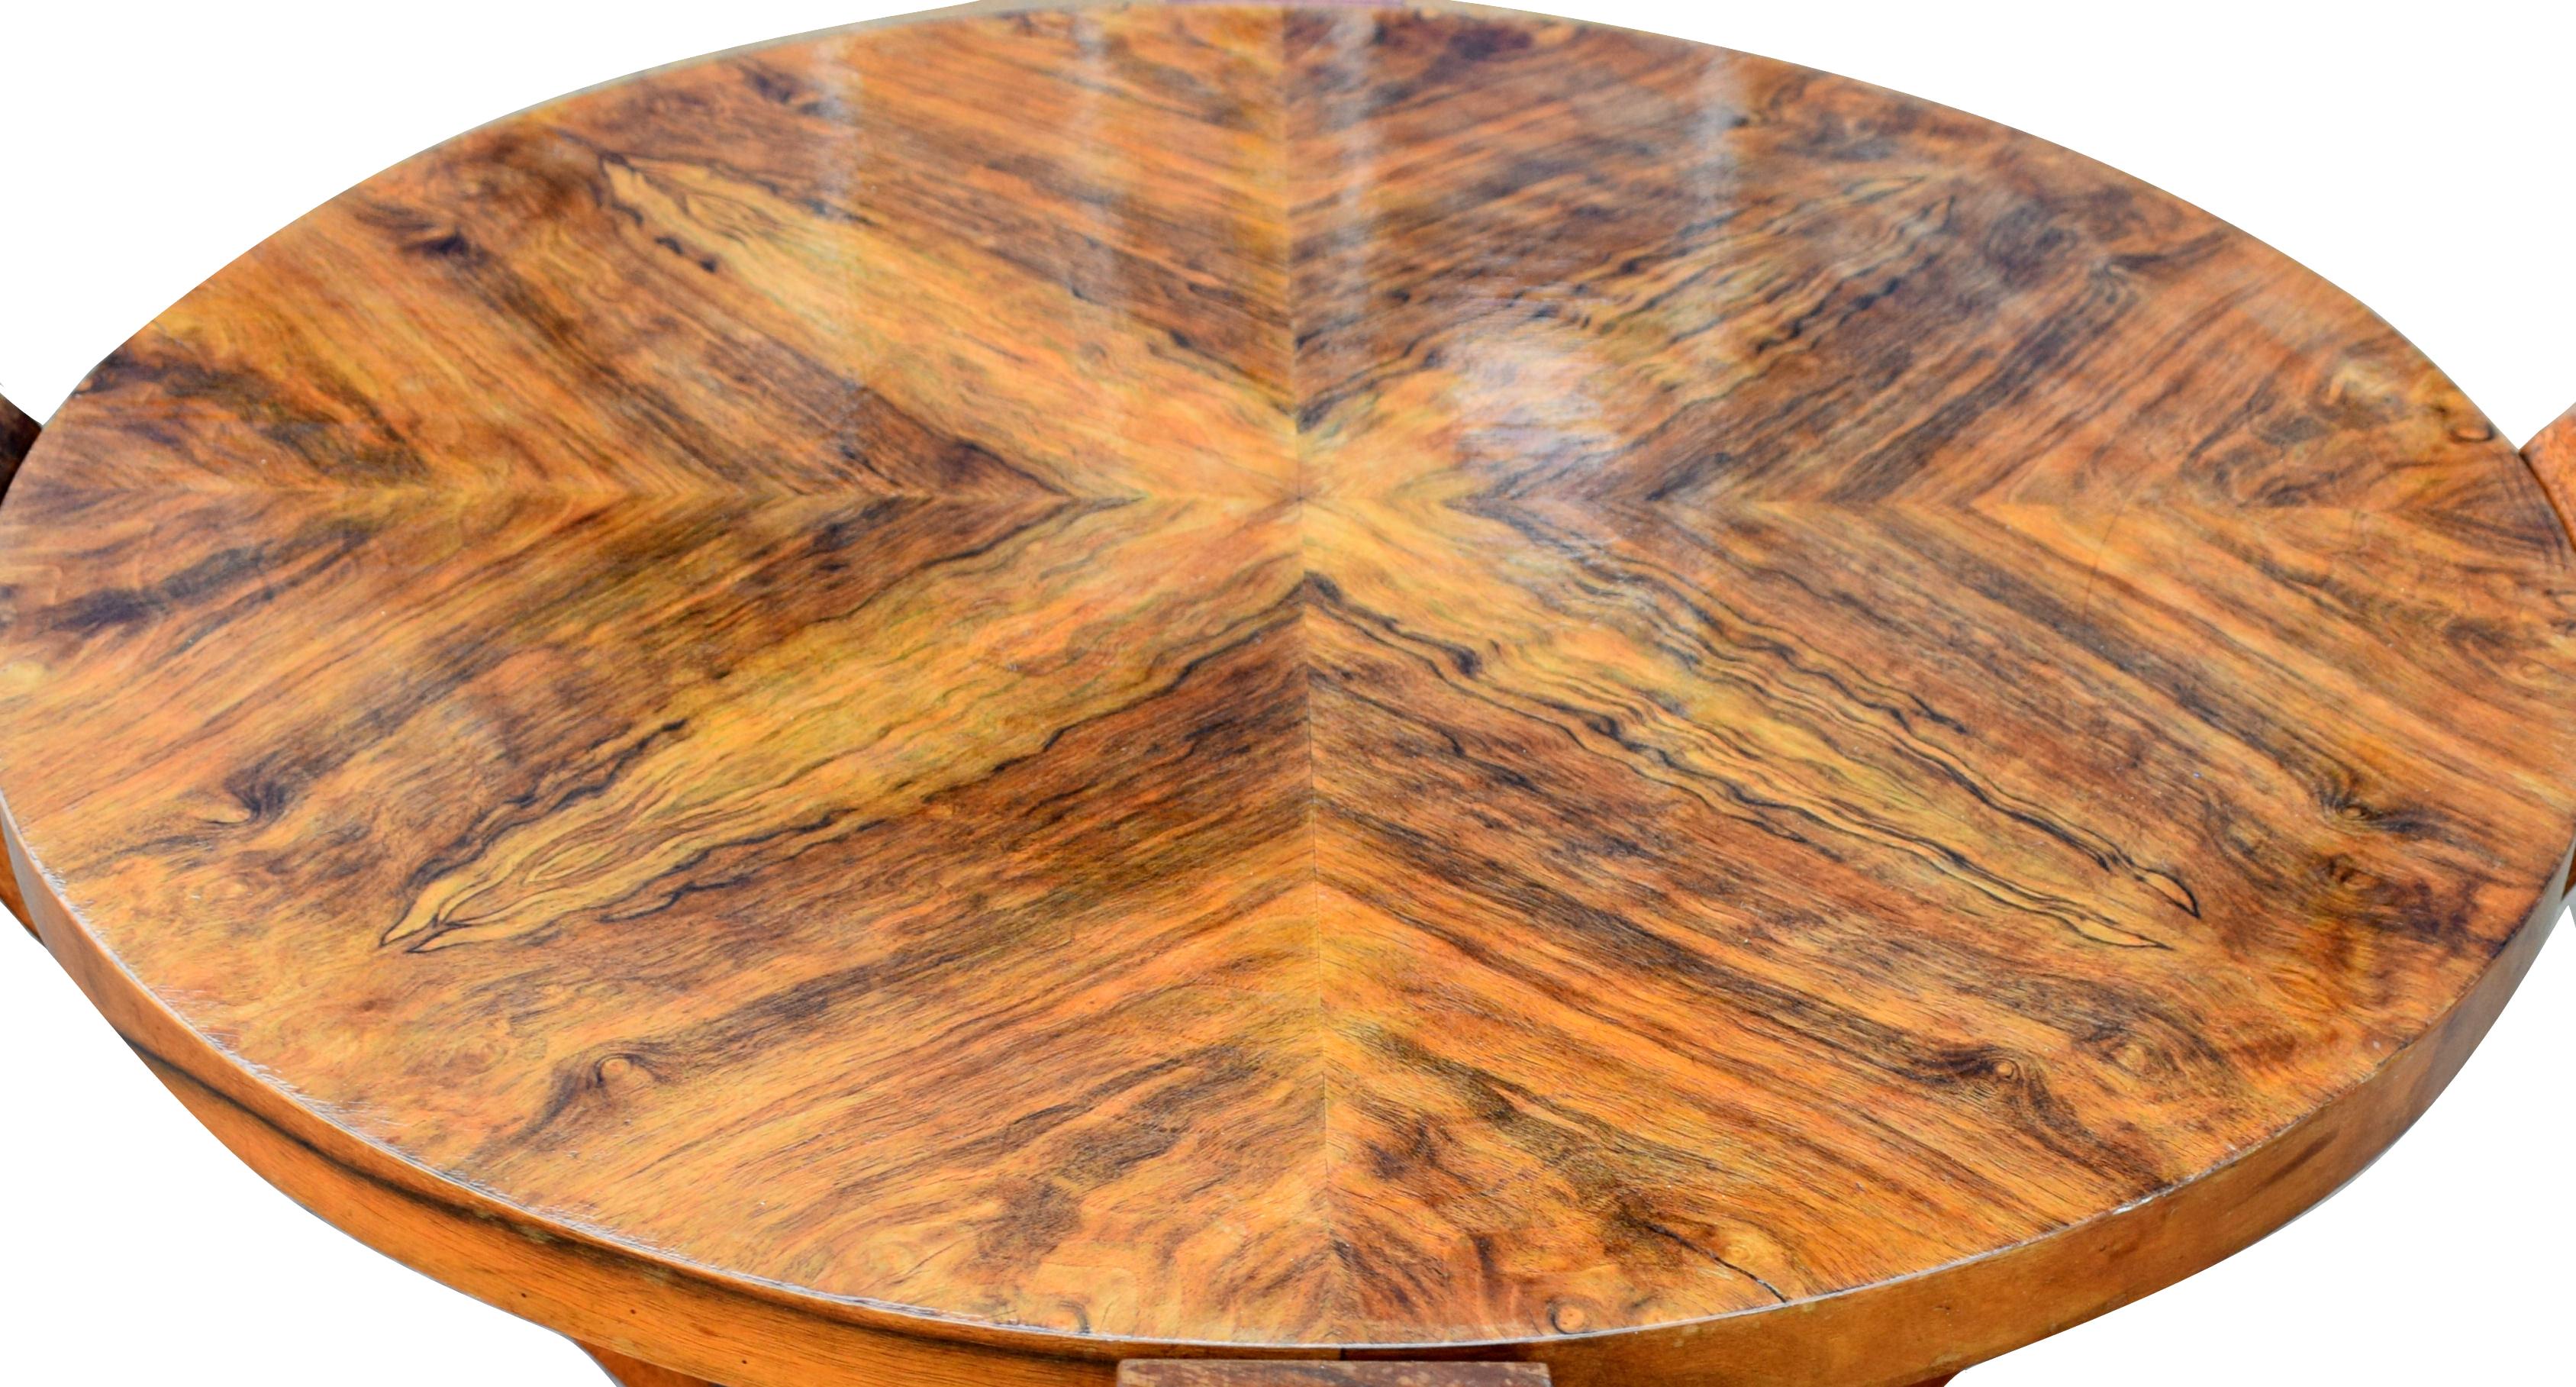 Very stylish and totally authentic French Art Deco walnut and maple centre table dating to the 1930s. This table is beautifully shaped and fully restored. Typically larger than occasional coffee tables, these make ideal pieces to make a focal point